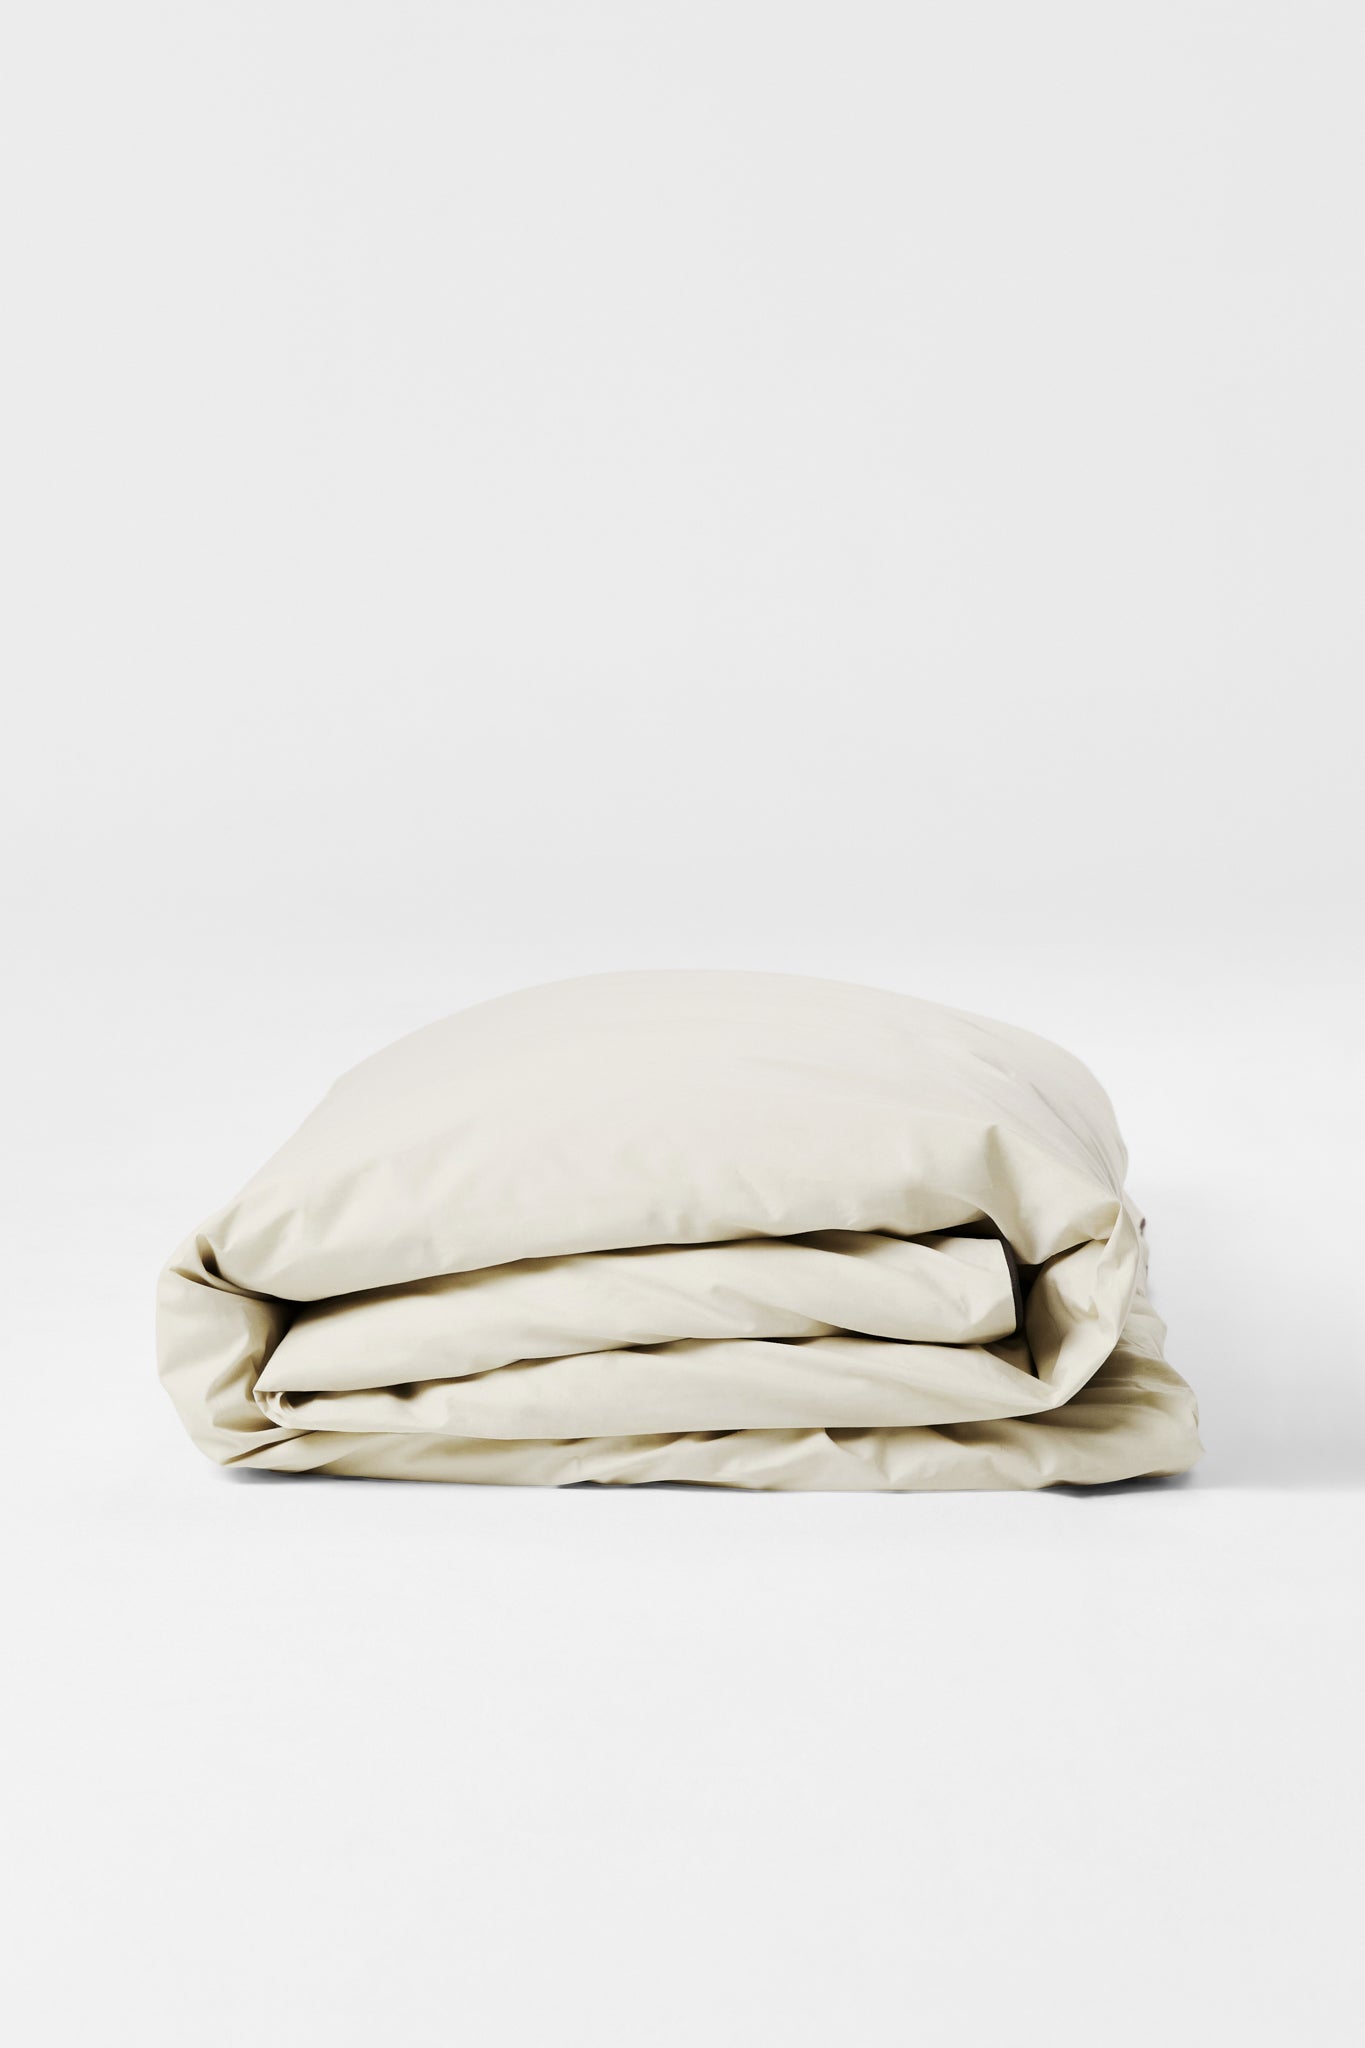 Duvet Cover in Contrast Edge, Canvas with Cinder